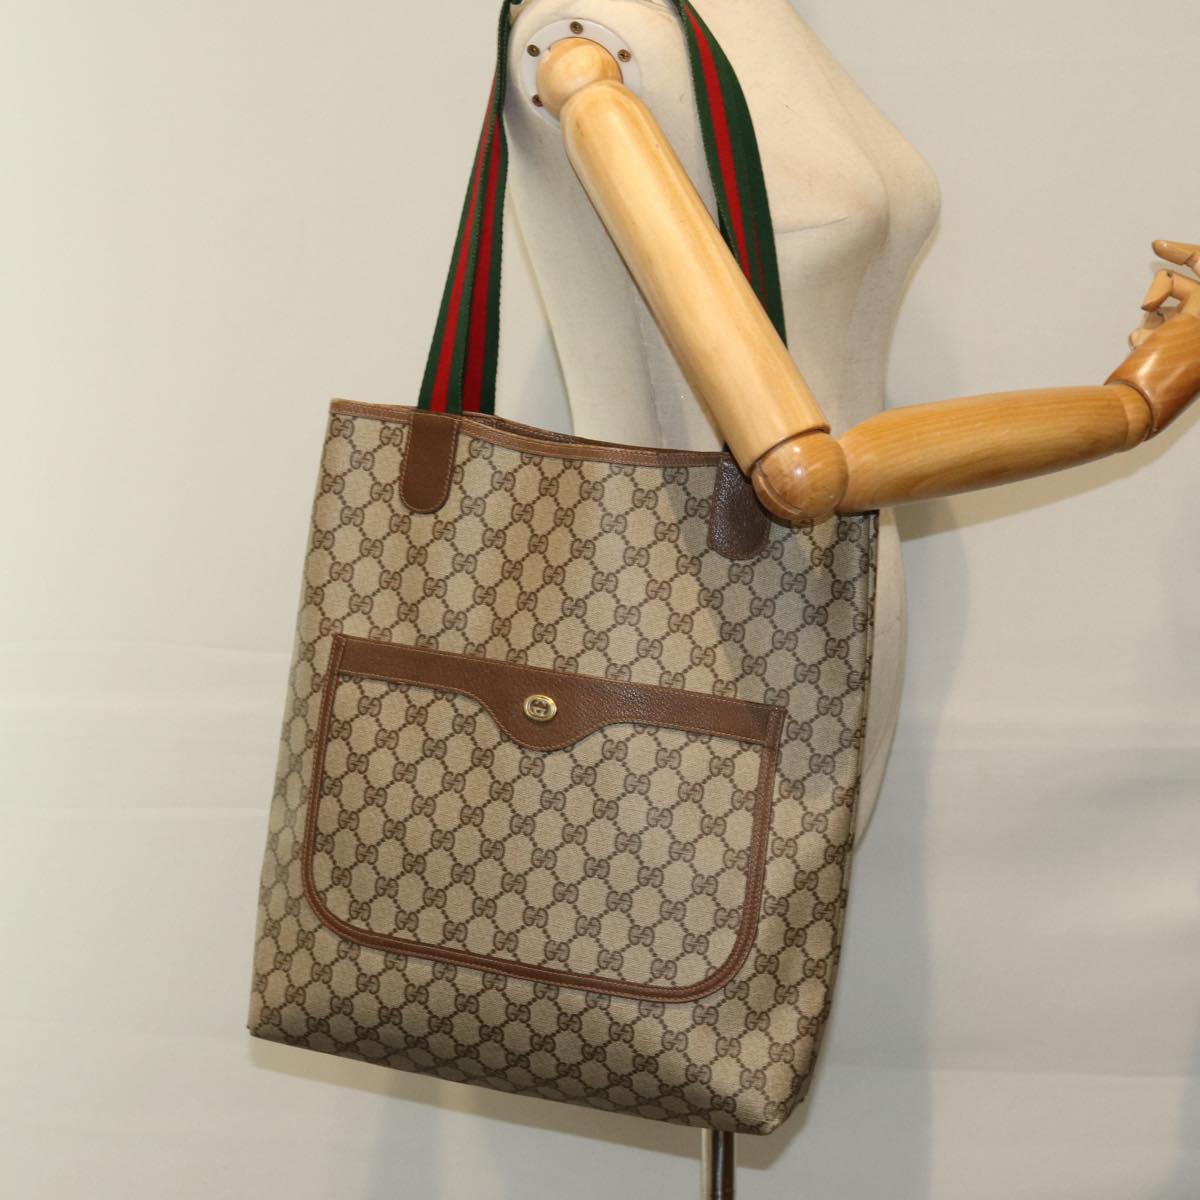 GUCCI GG Supreme Web Sherry Line Tote Bag PVC Beige Red 40 02 003 Auth yk12437